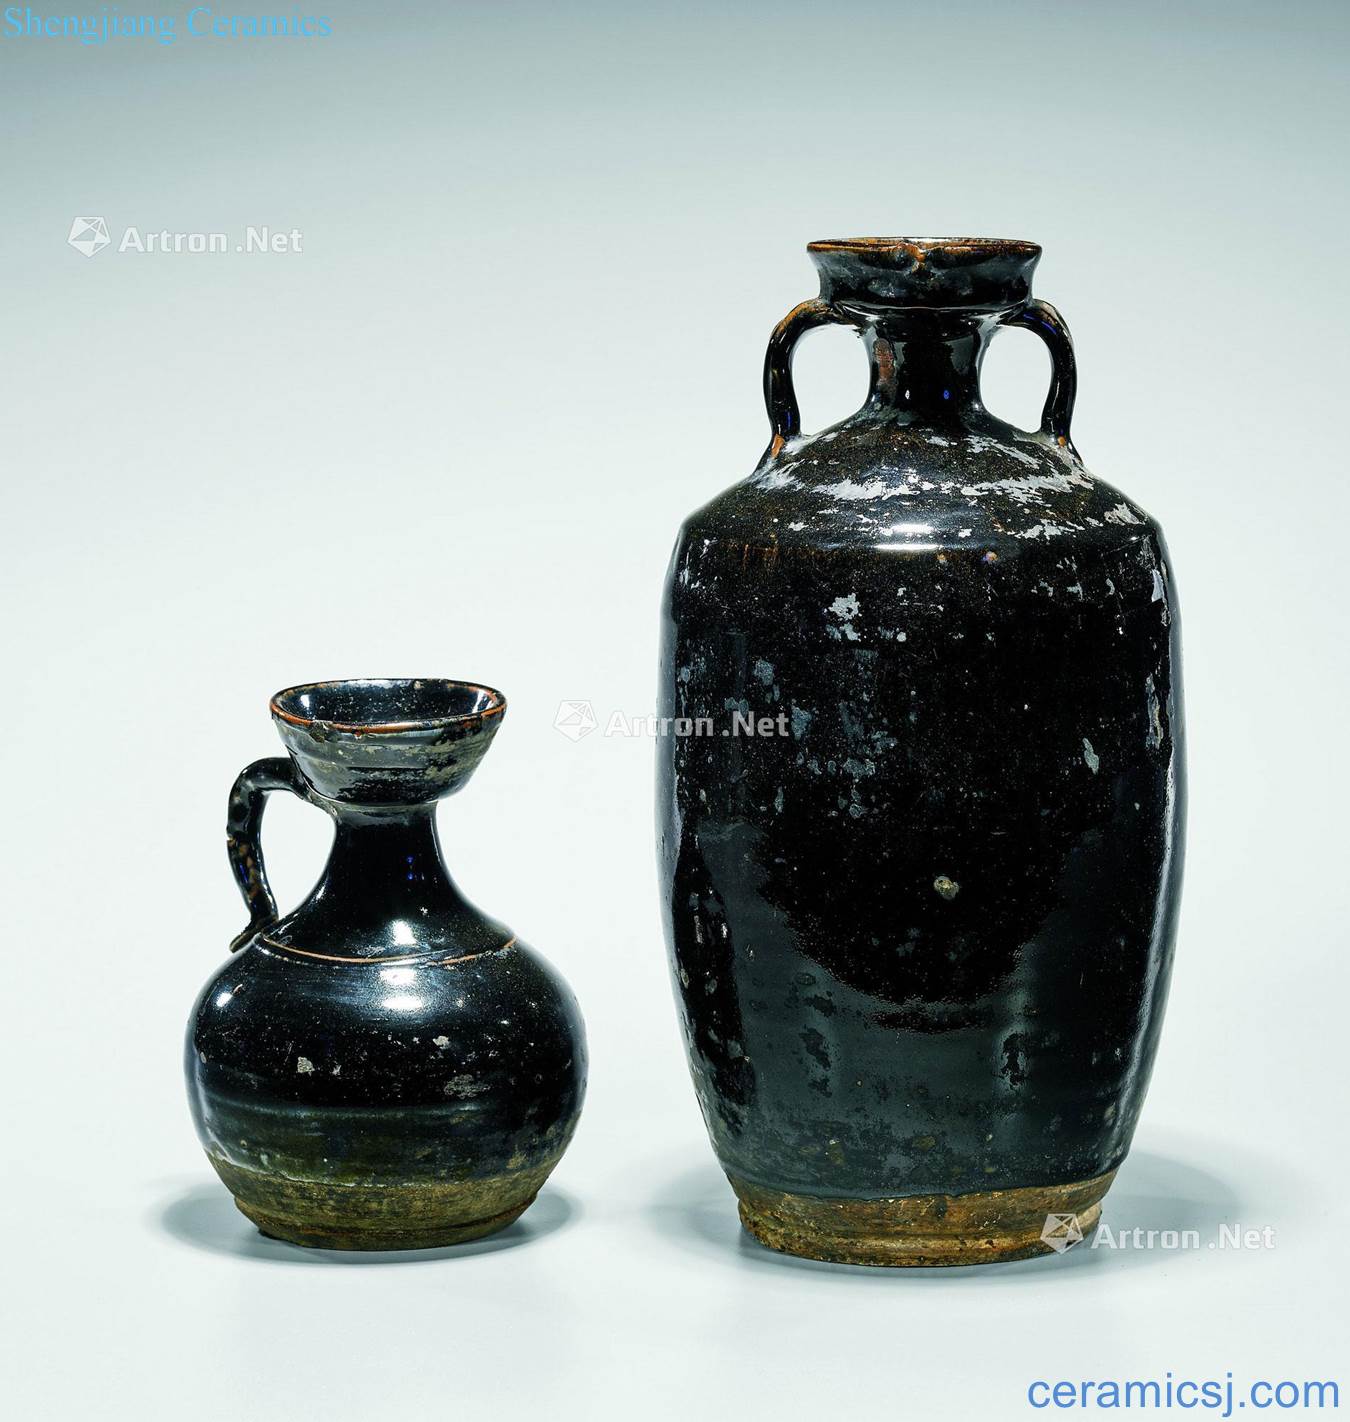 The jin dynasty in henan glaze cans